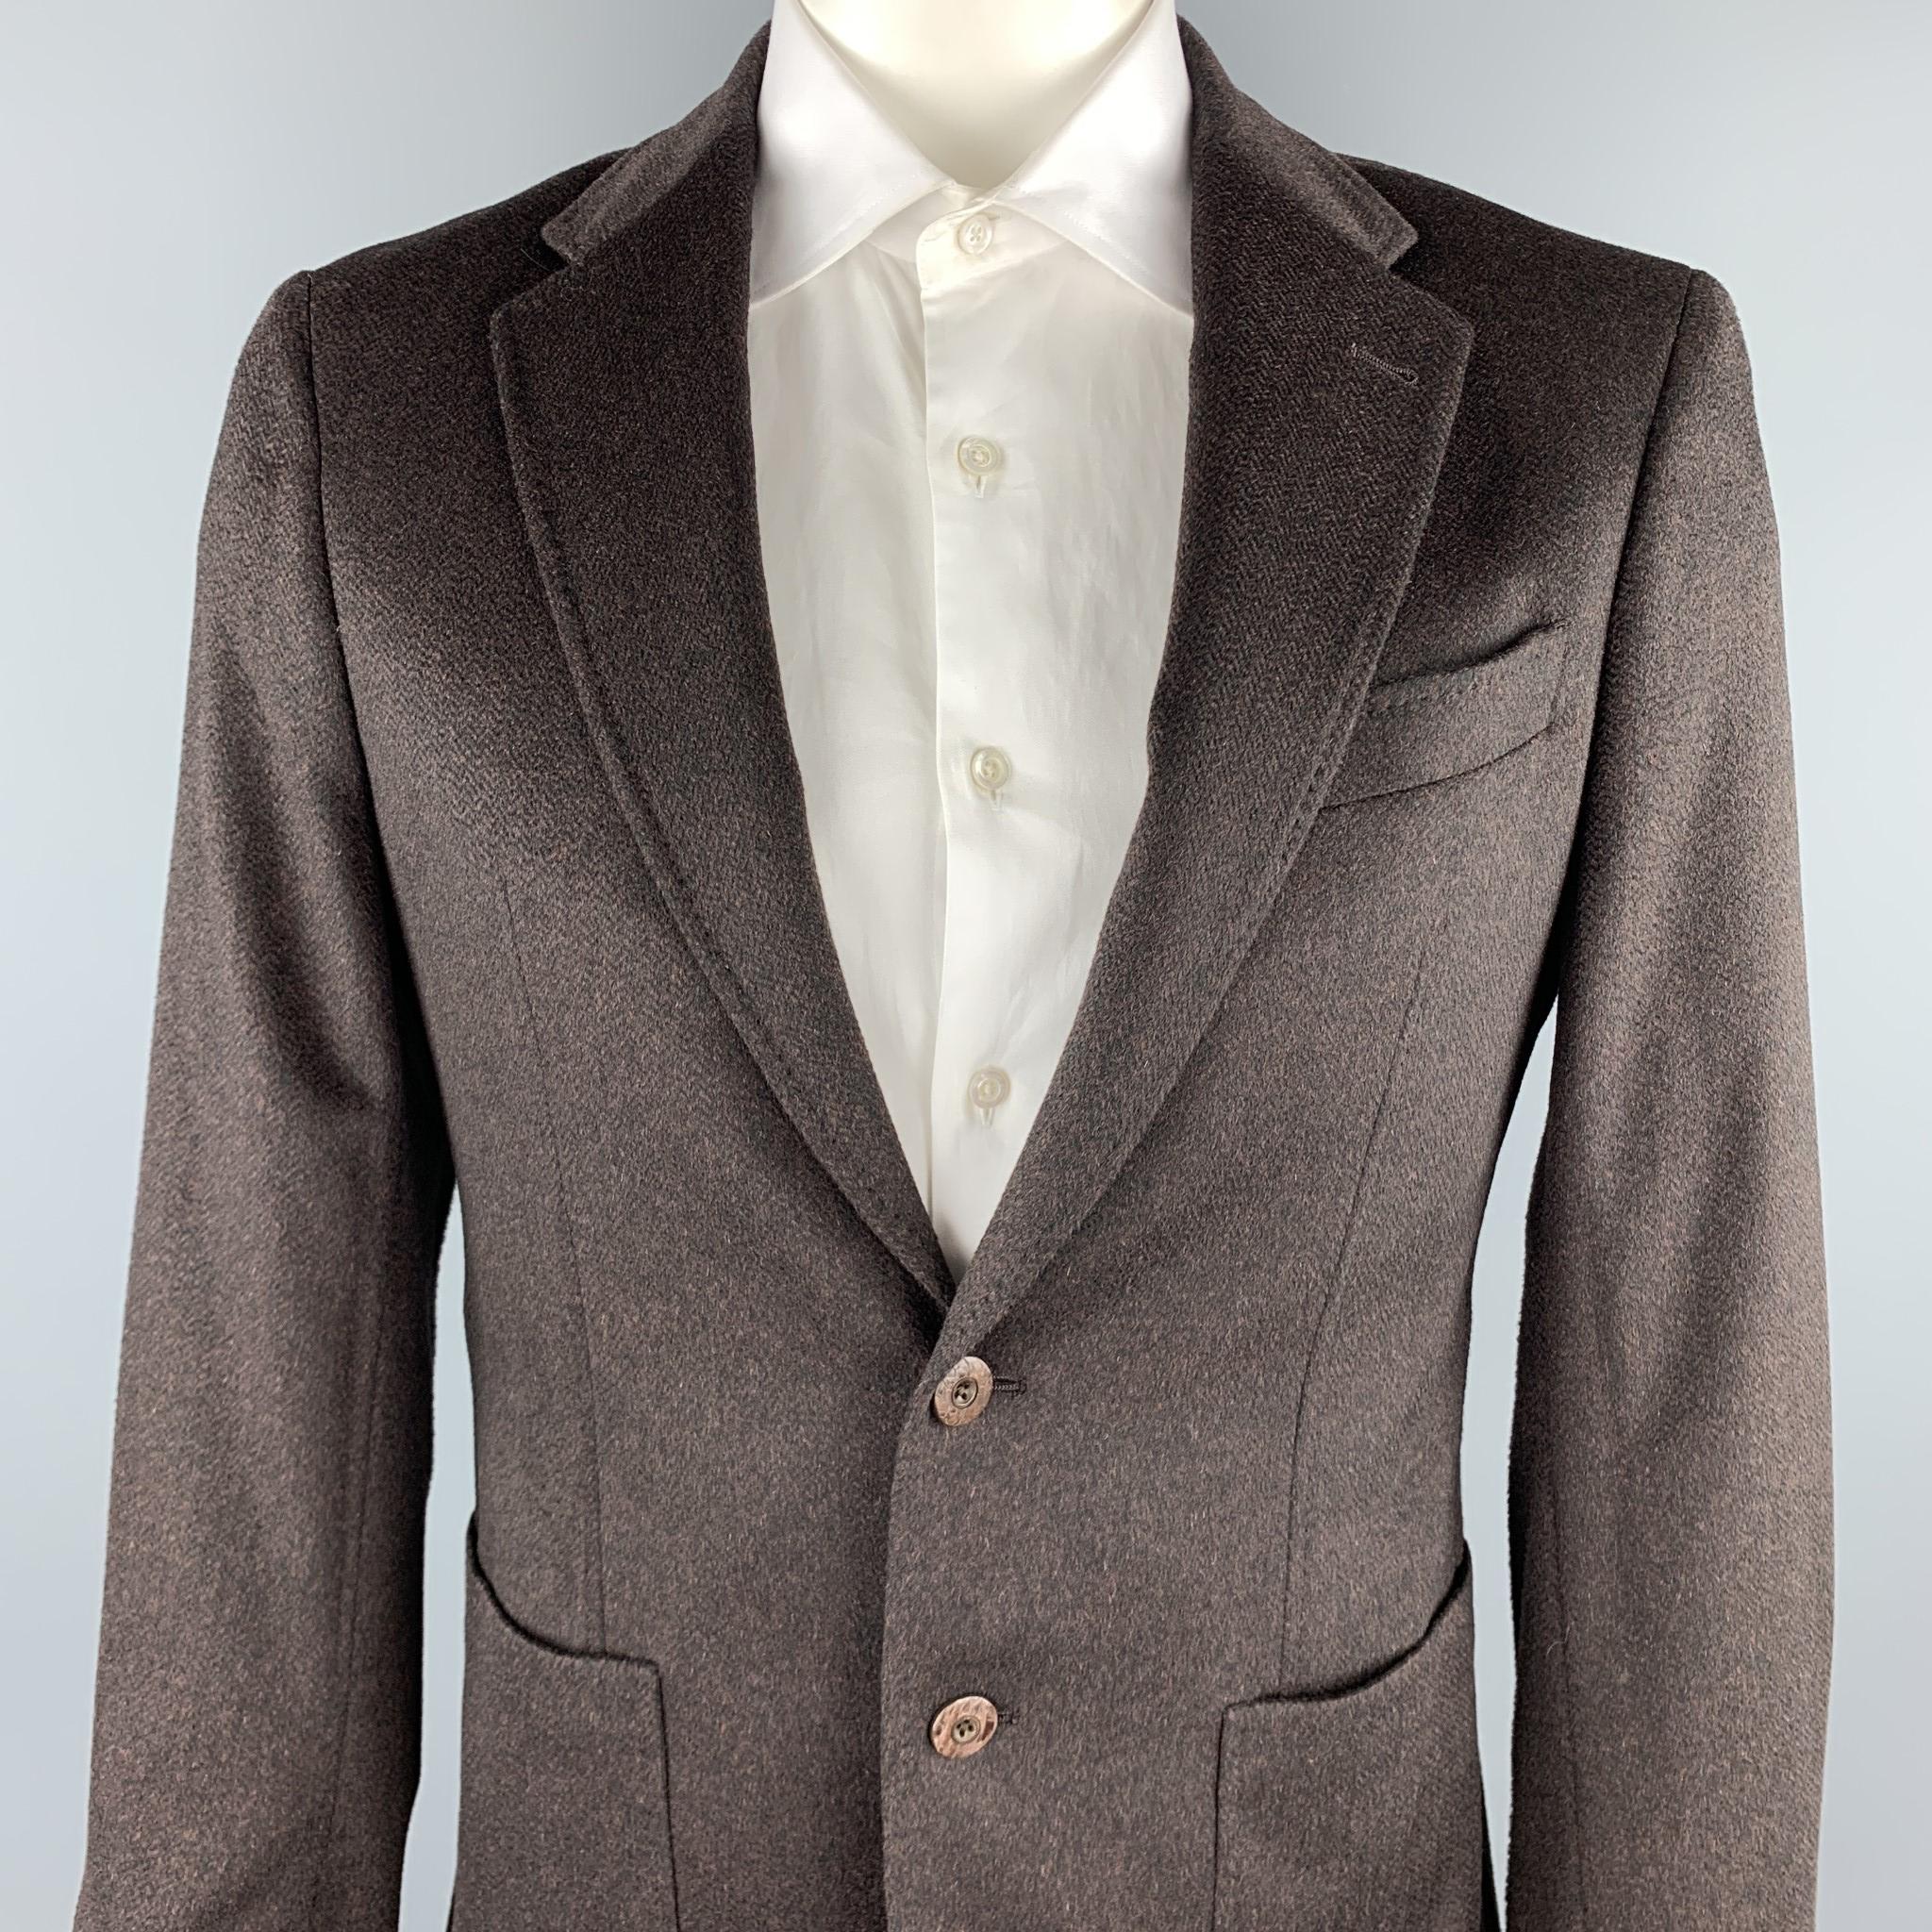 JOSEPH ABBOUD sport coat comes in a brown textured cashmere featuring a notch lapel, patch pockets, shoulder paisley print liner, patch pockets, and a two button closure. Made in USA.

Excellent Pre-Owned Condition.
Marked: 40